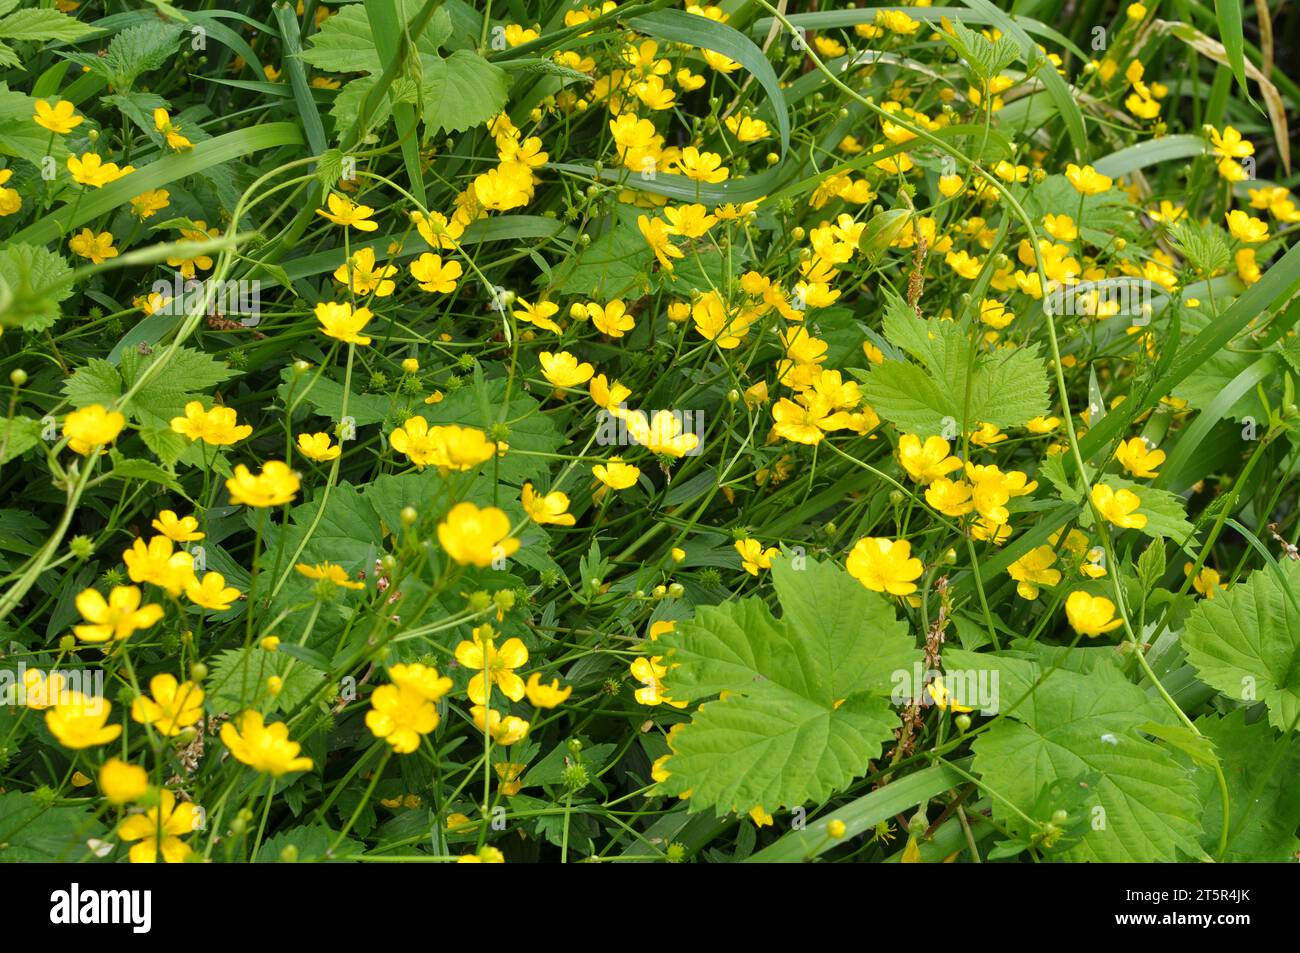 Creeping buttercup (Ranunculus repens) grows among grasses in the wild Stock Photo